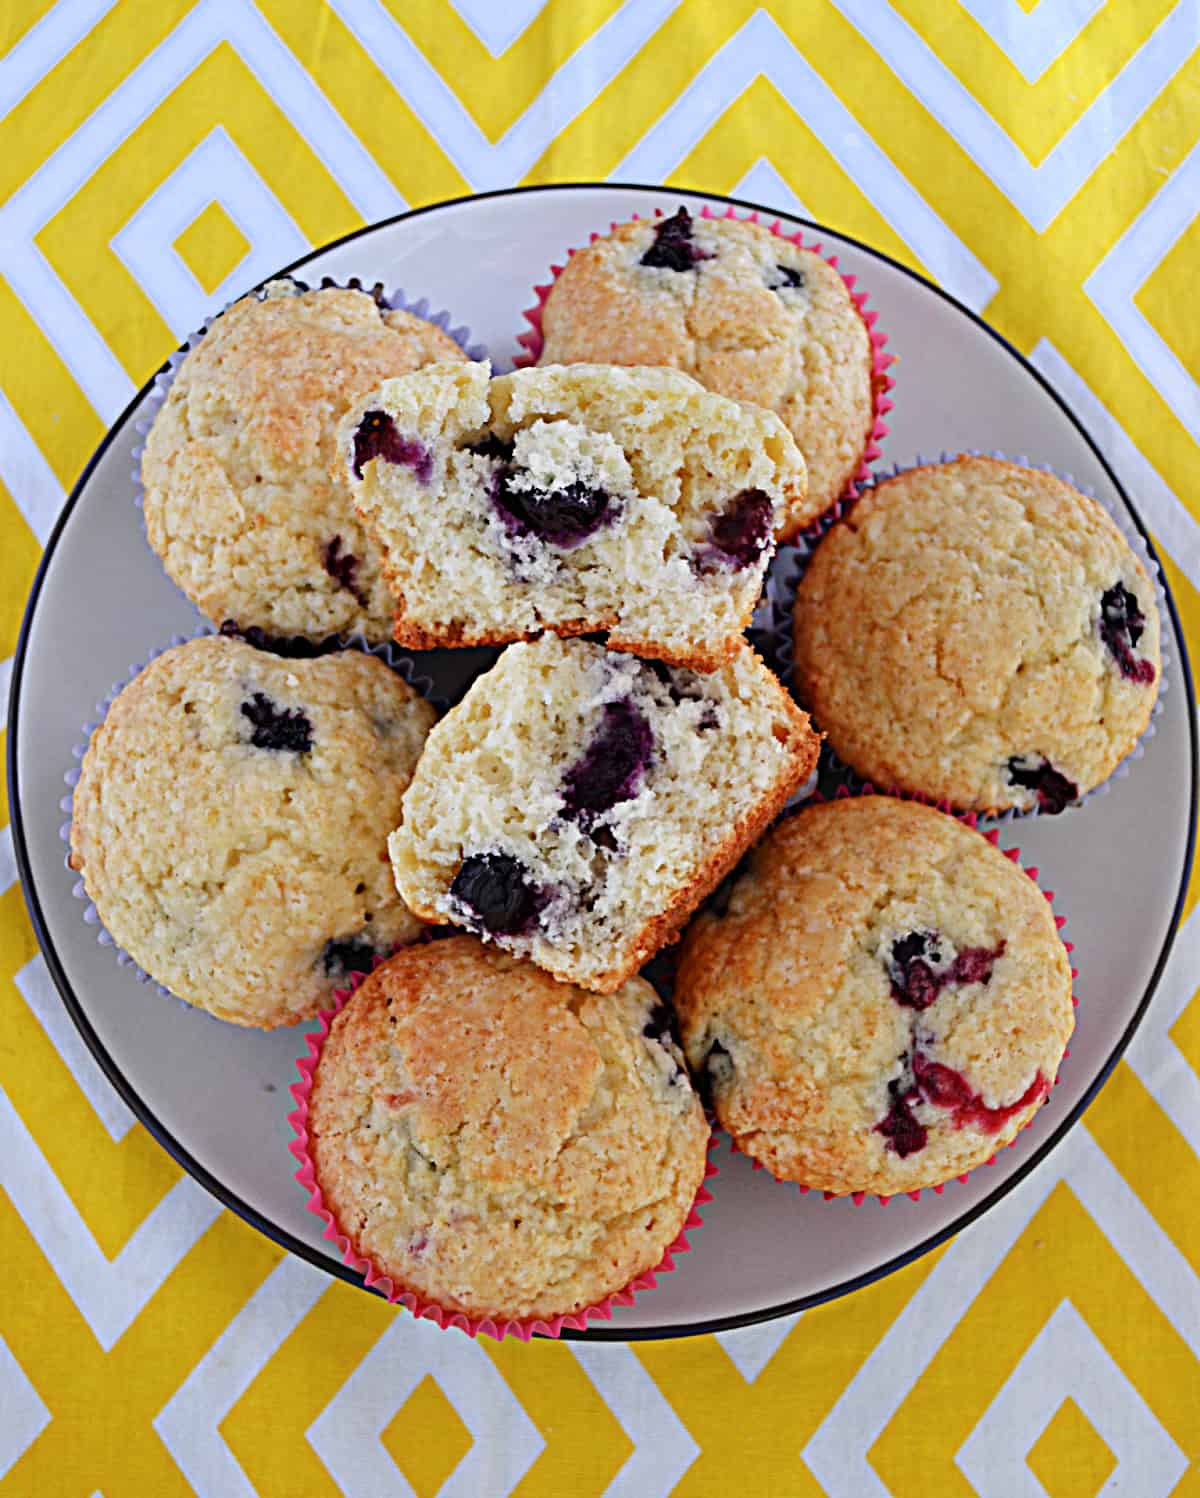 A plate of lemon blueberry muffins with one muffin being cut in half and the inside showing.